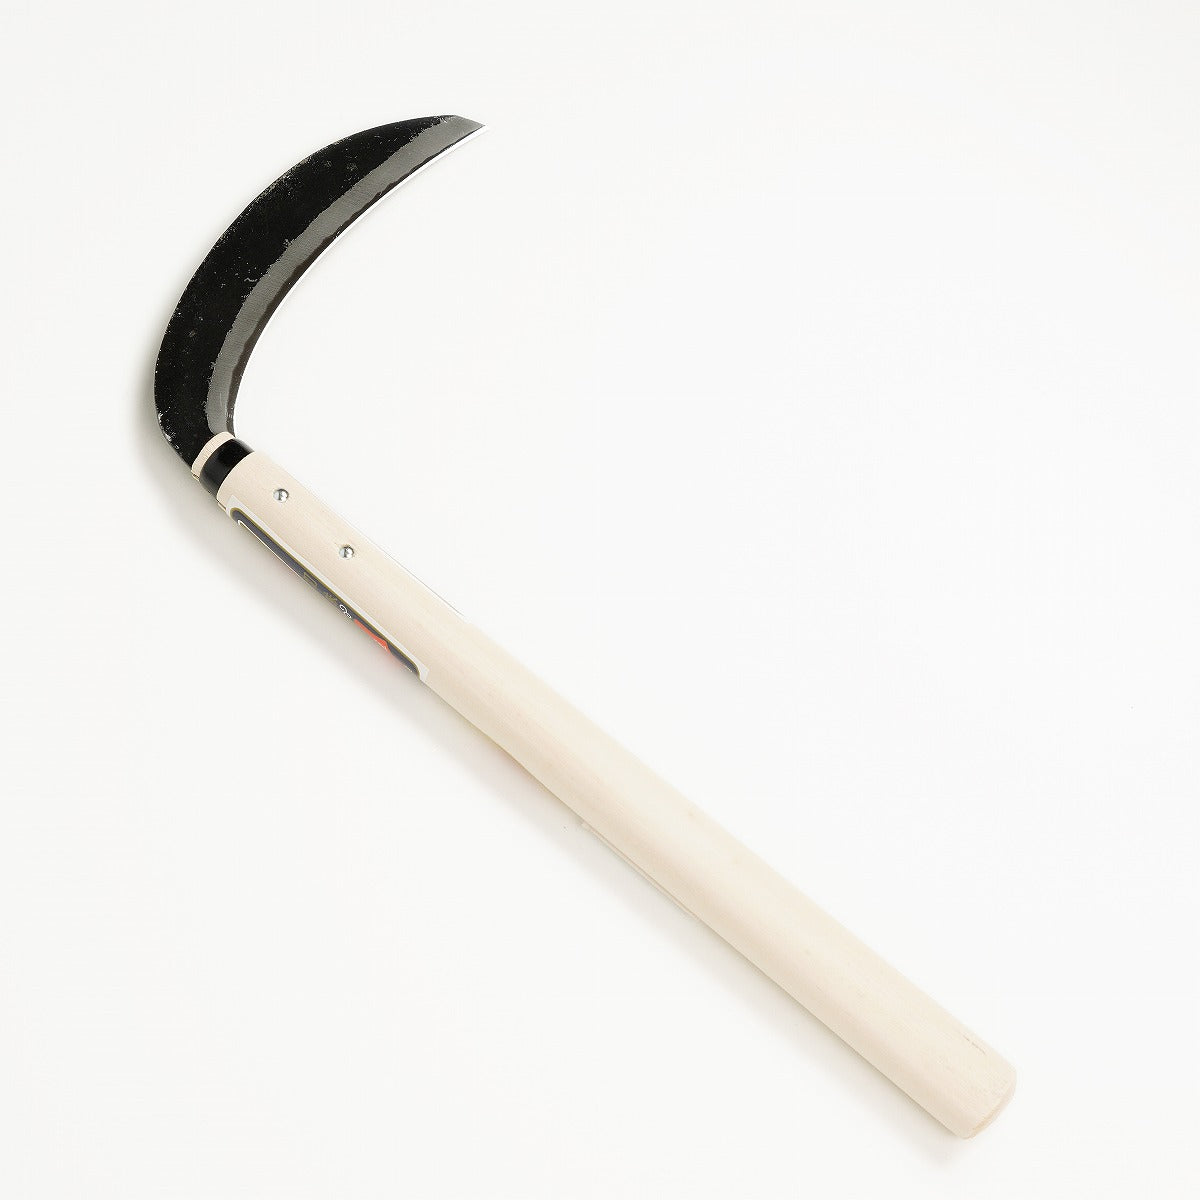 HONMAMON "OJIKA" Aogami Mowing Sickle, Thin Blade, Made in Tosa, Japan (165mm(6.5 Inch))